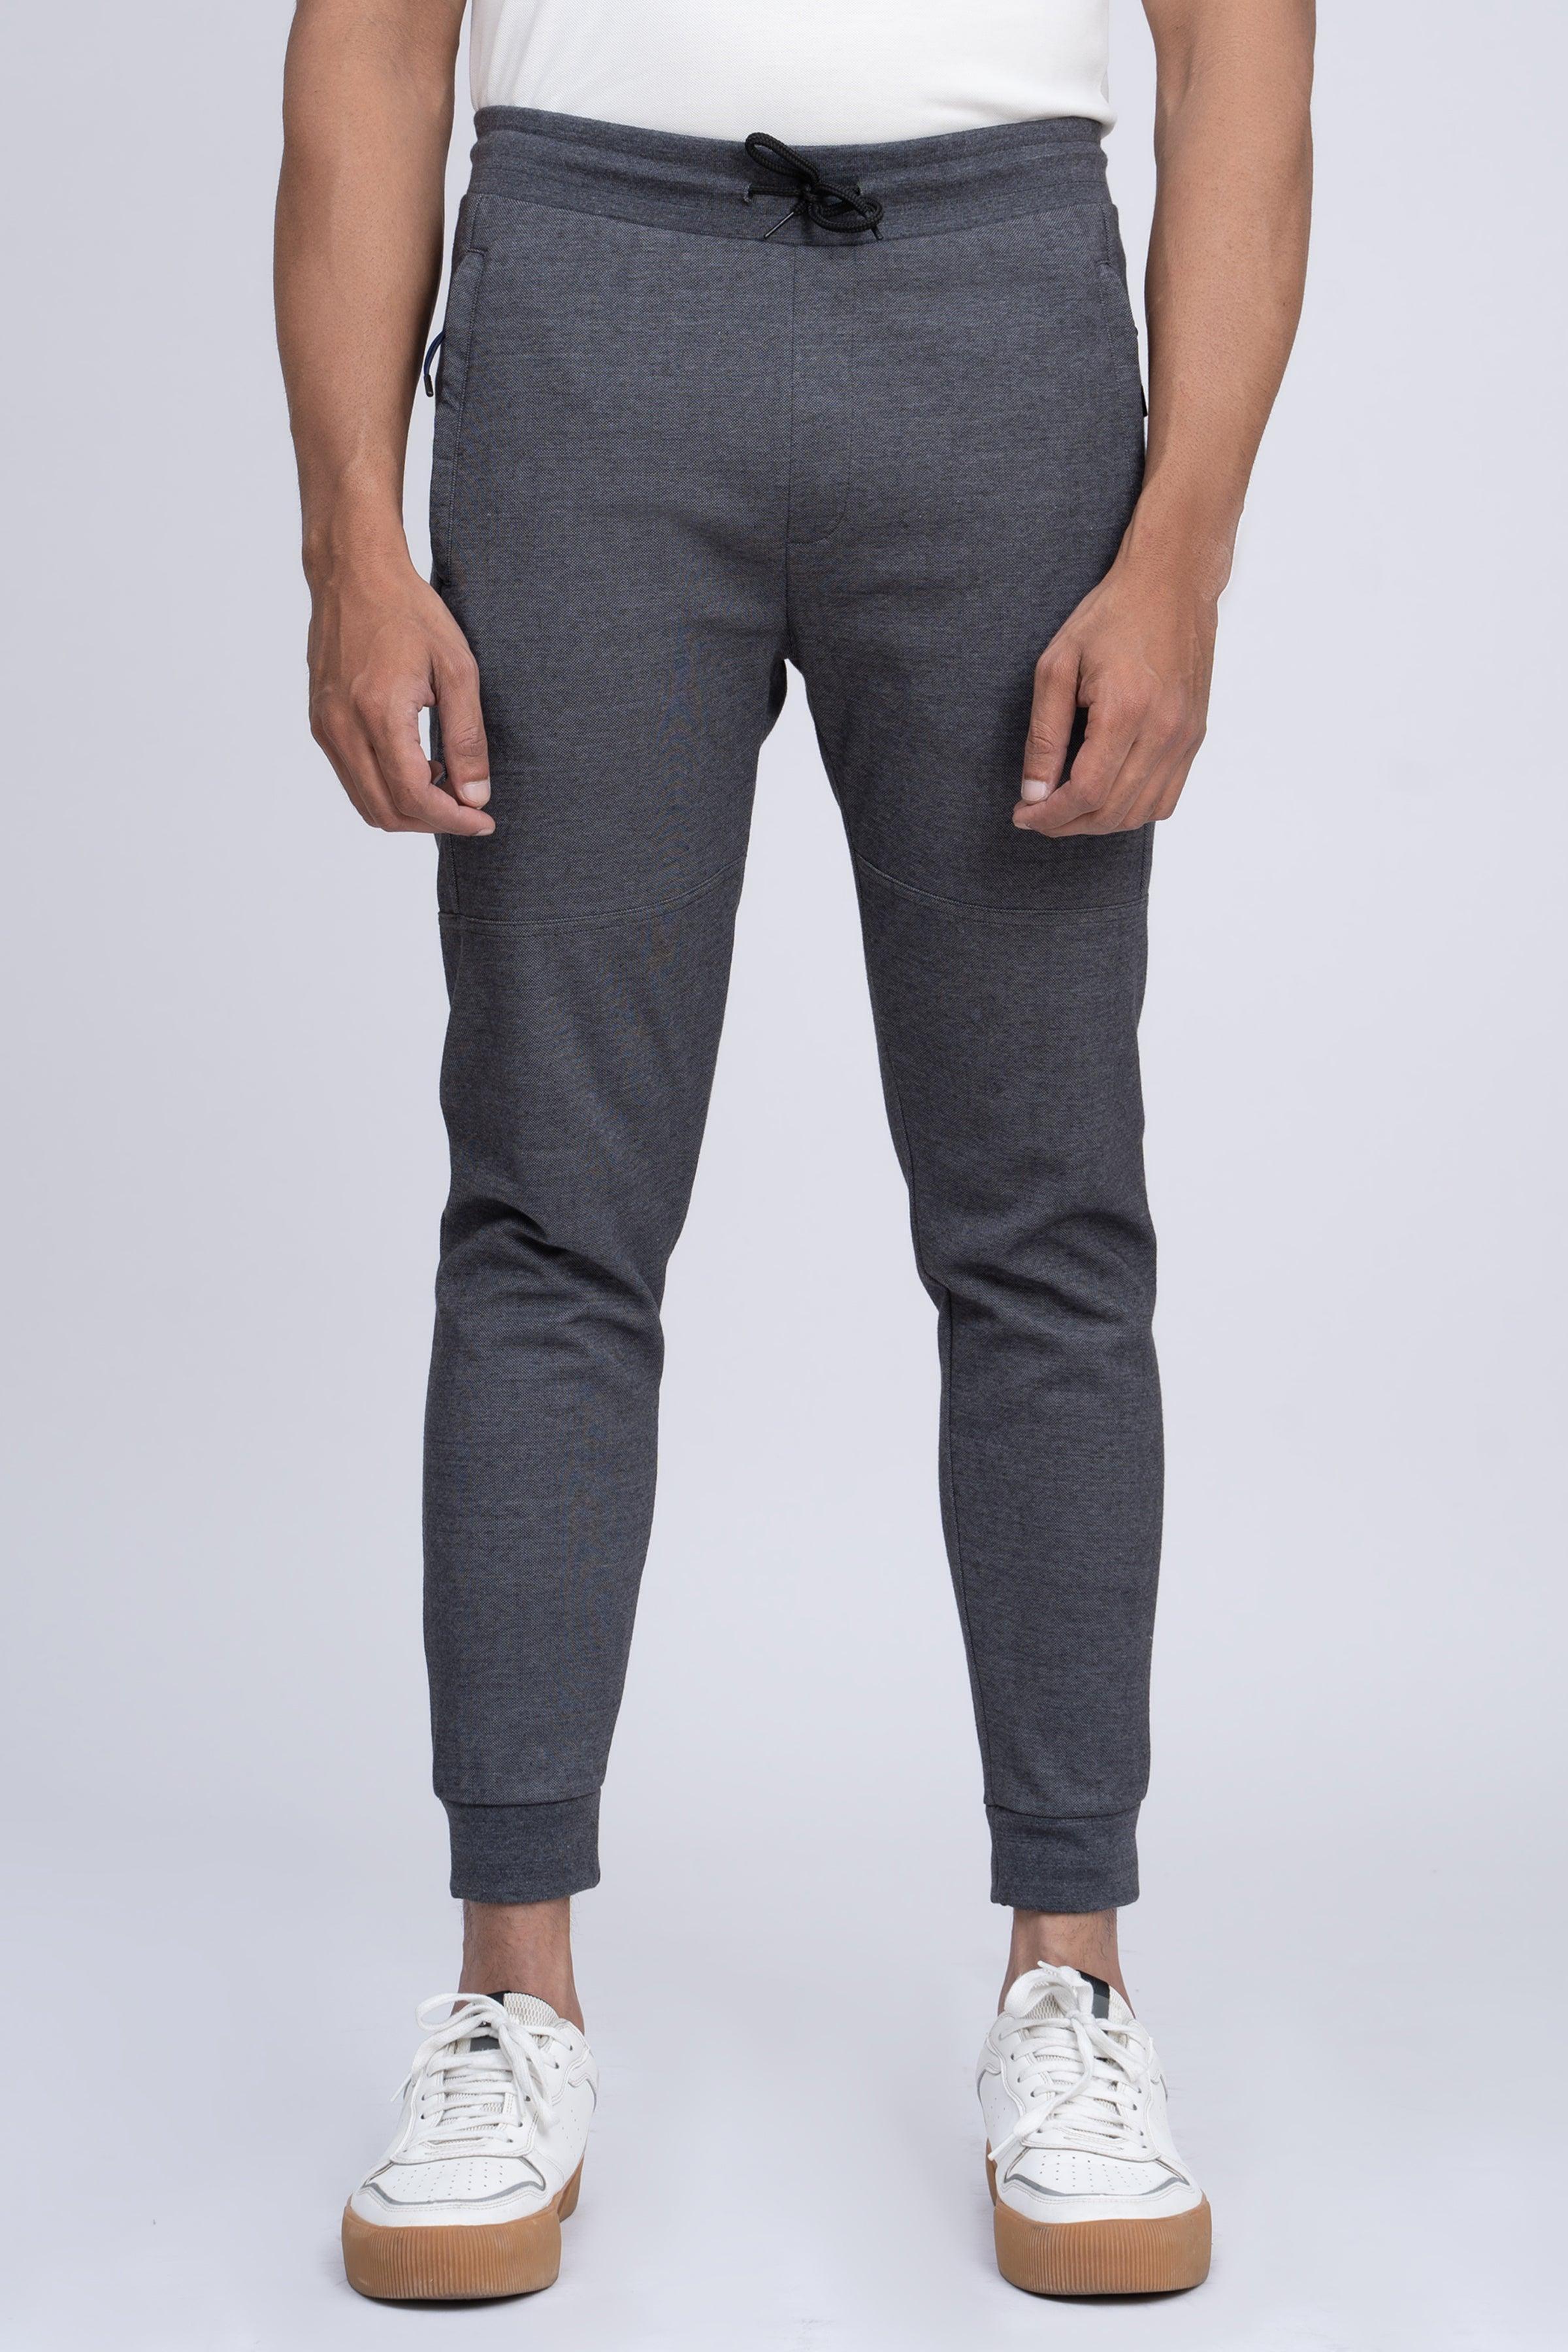 PIQUE INTERLOCK TROUSER CHARCOAL at Charcoal Clothing